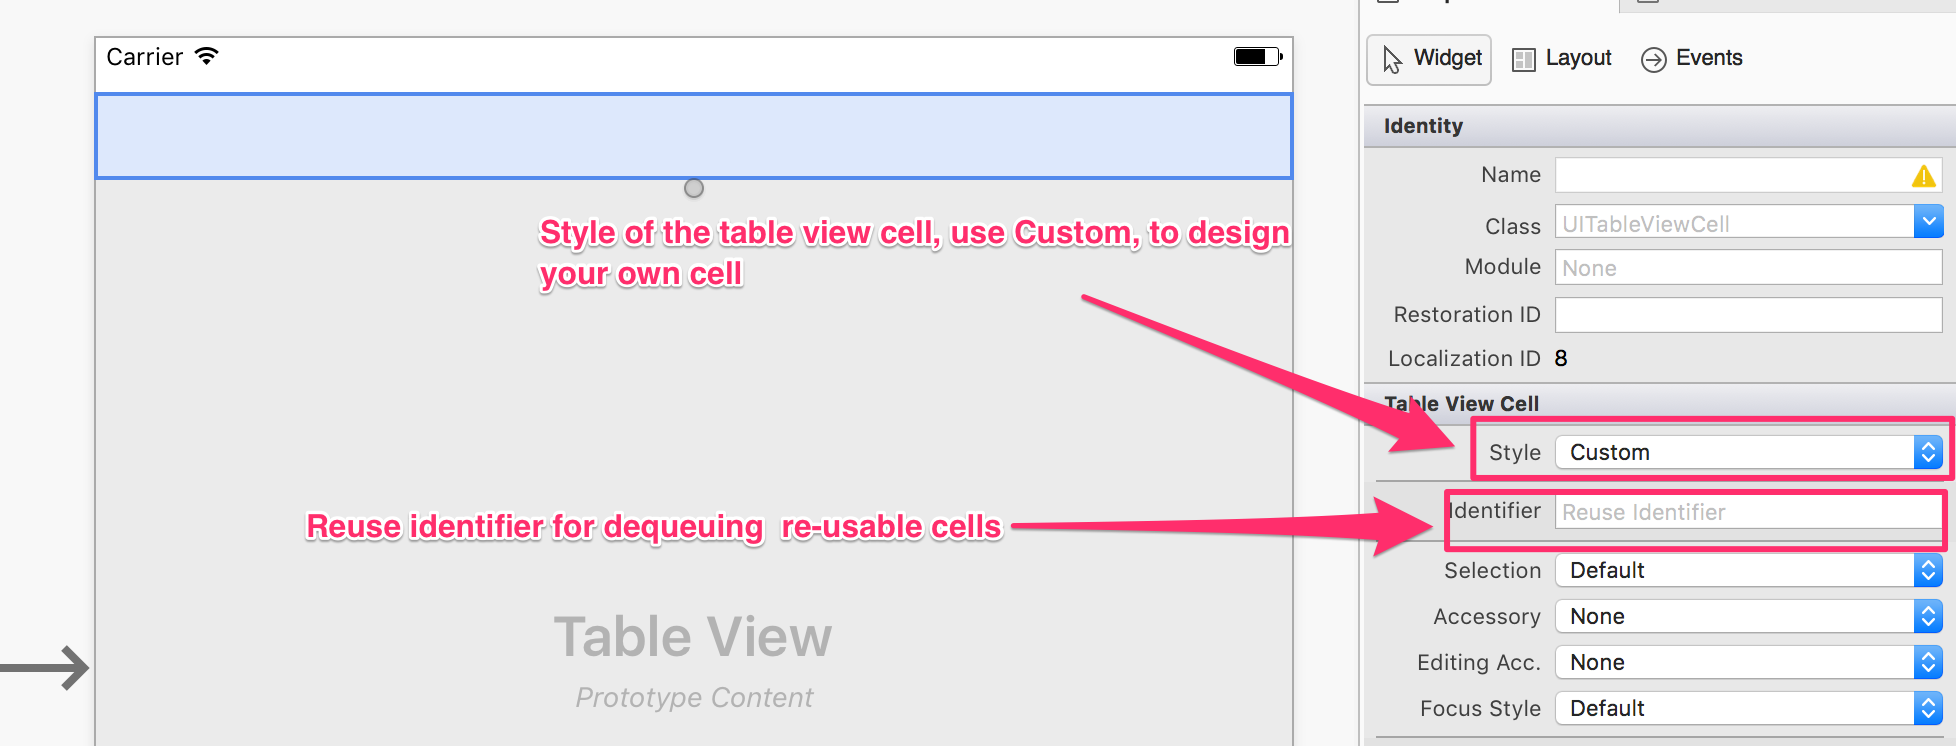 Table View Cell